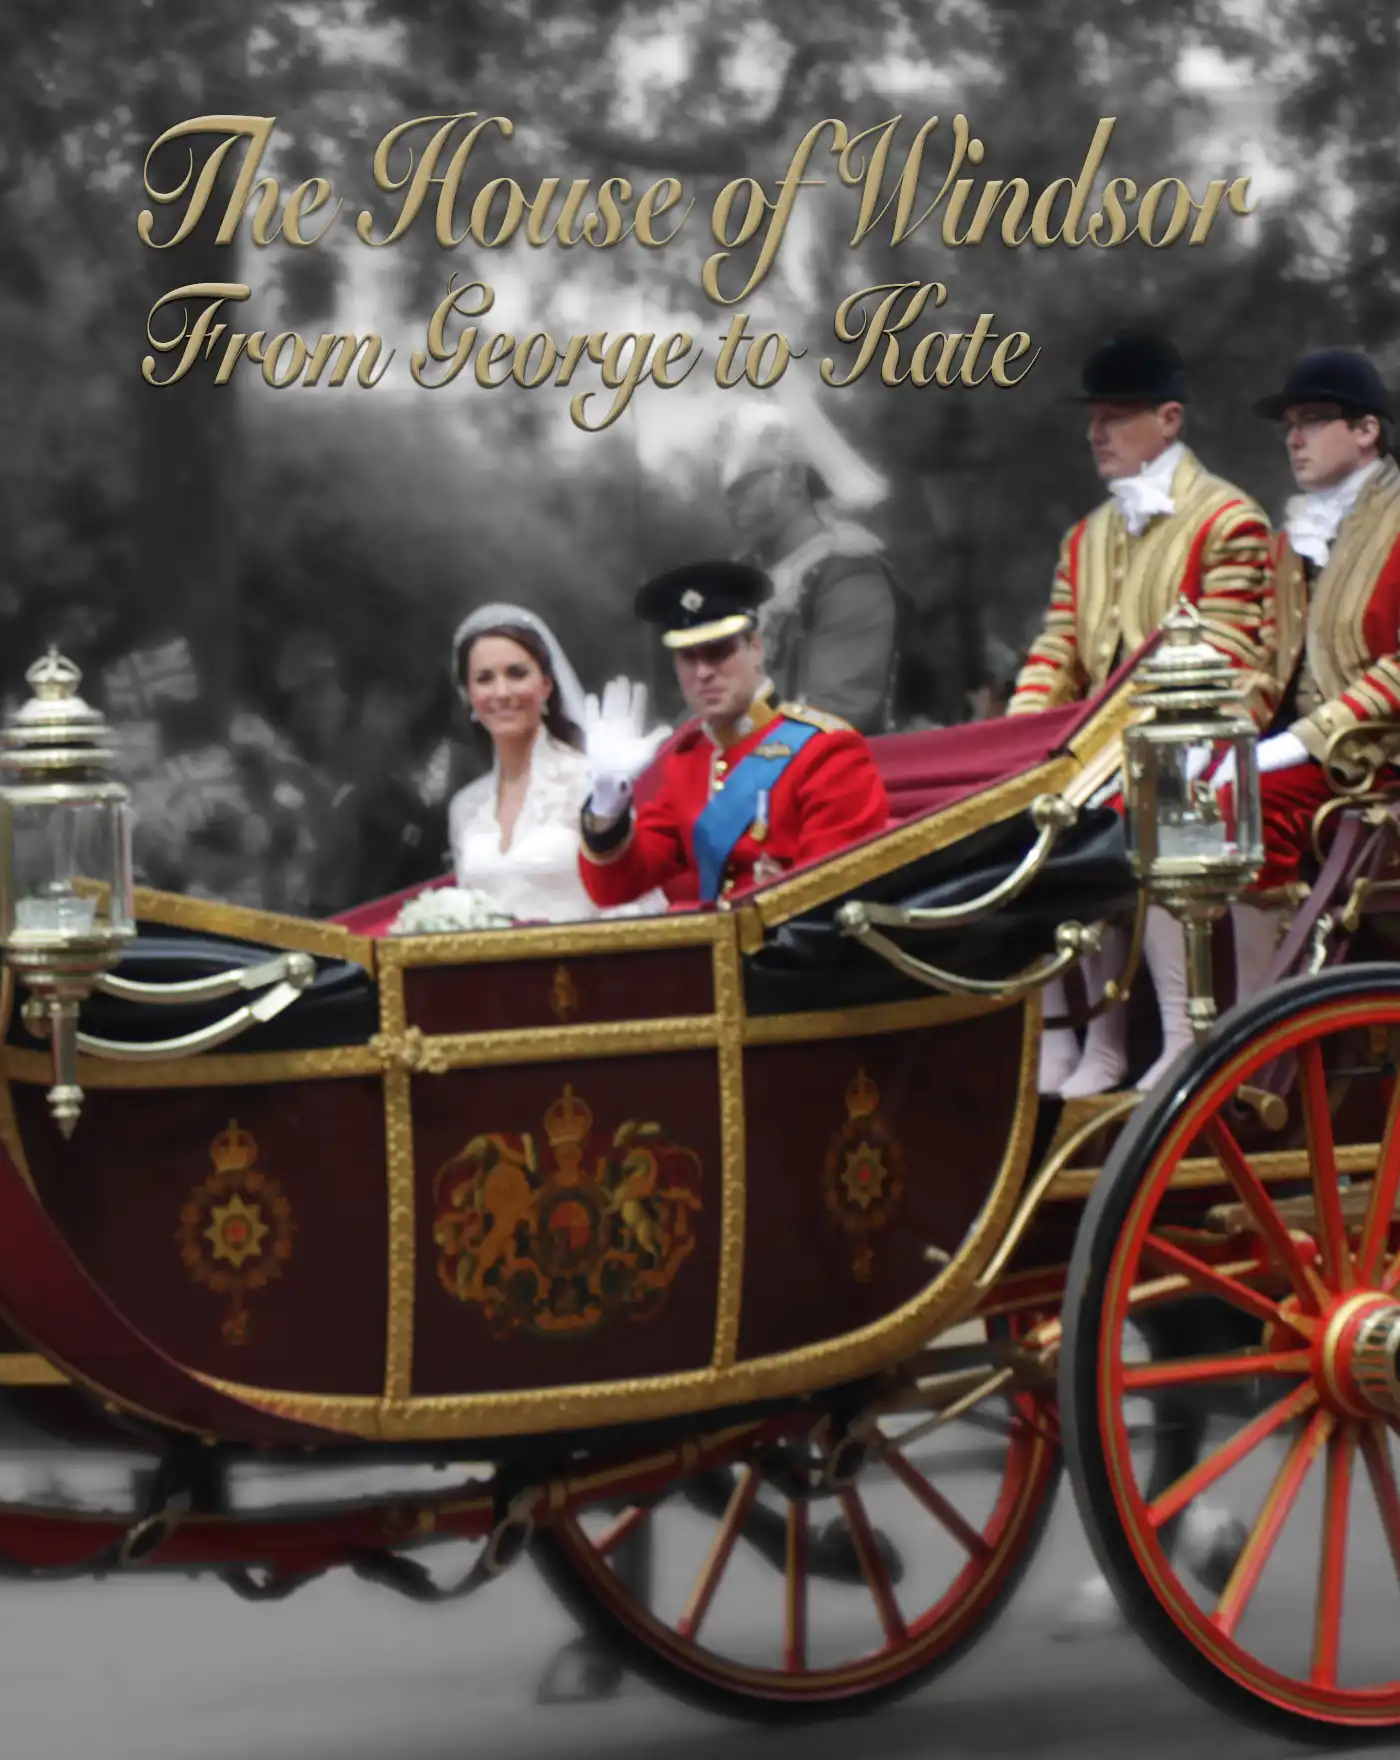 The House of Windsor - George to Kate